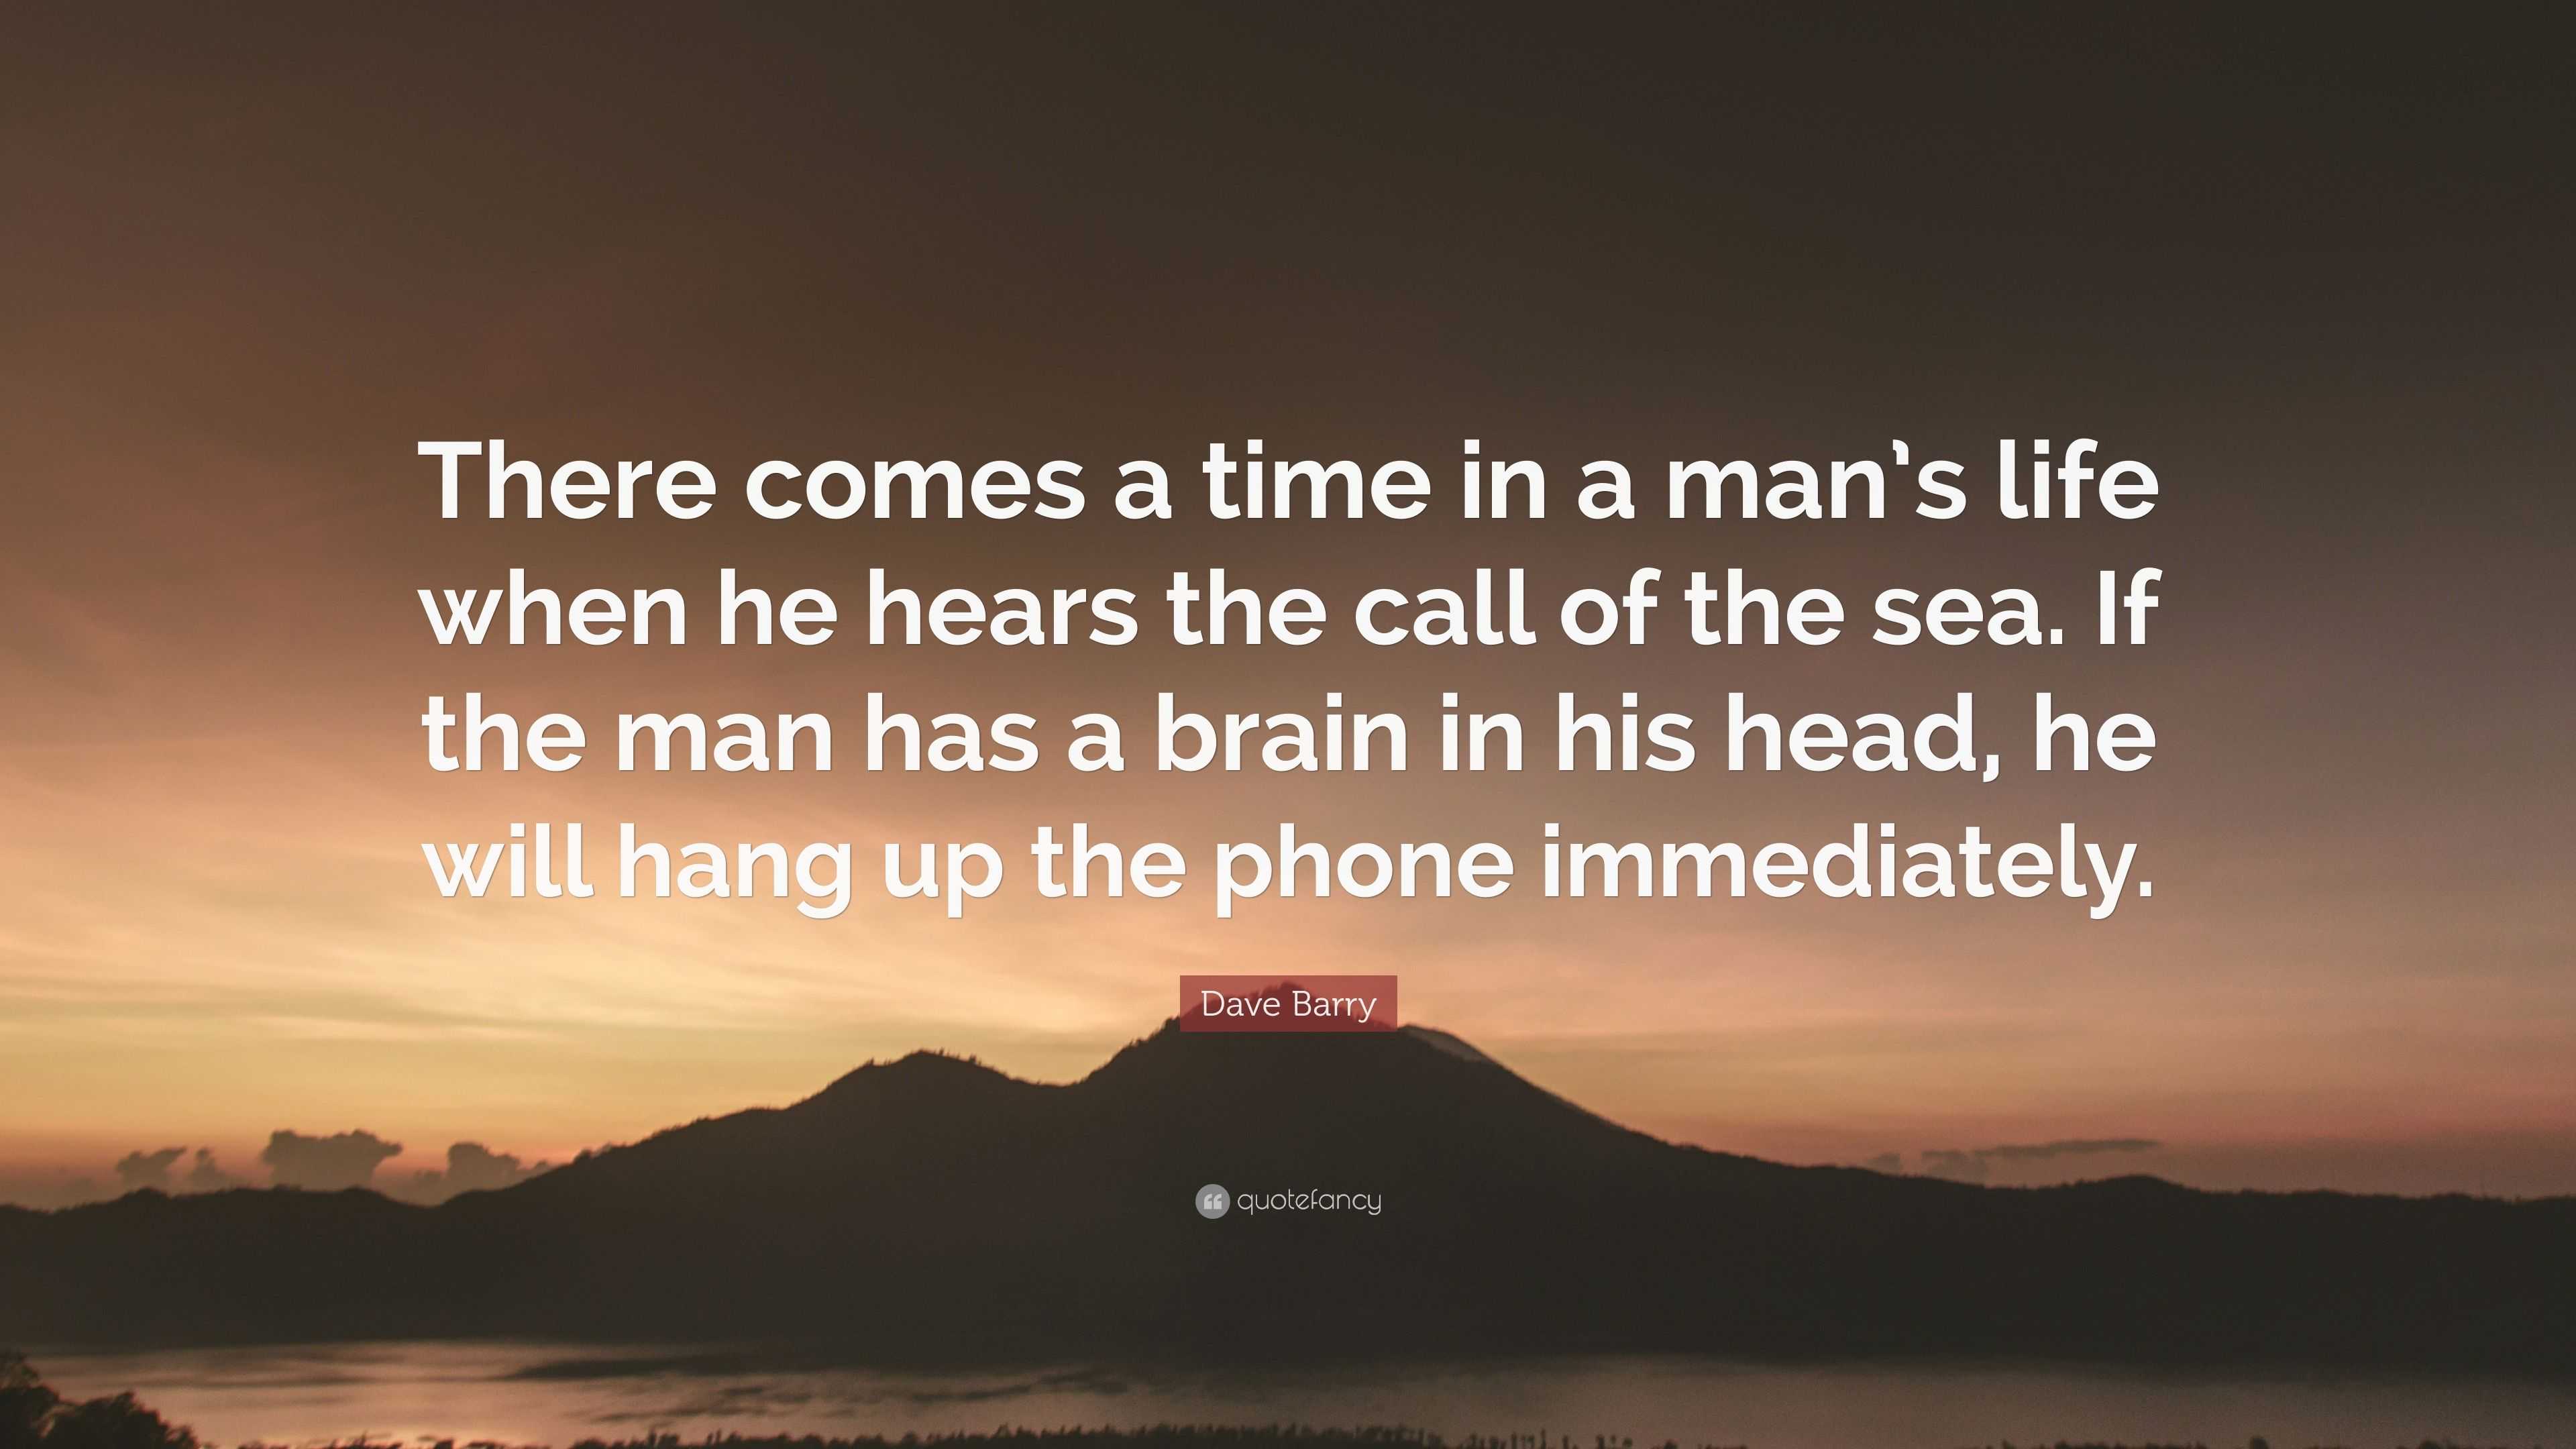 Dave Barry Quote “There es a time in a man s life when he hears